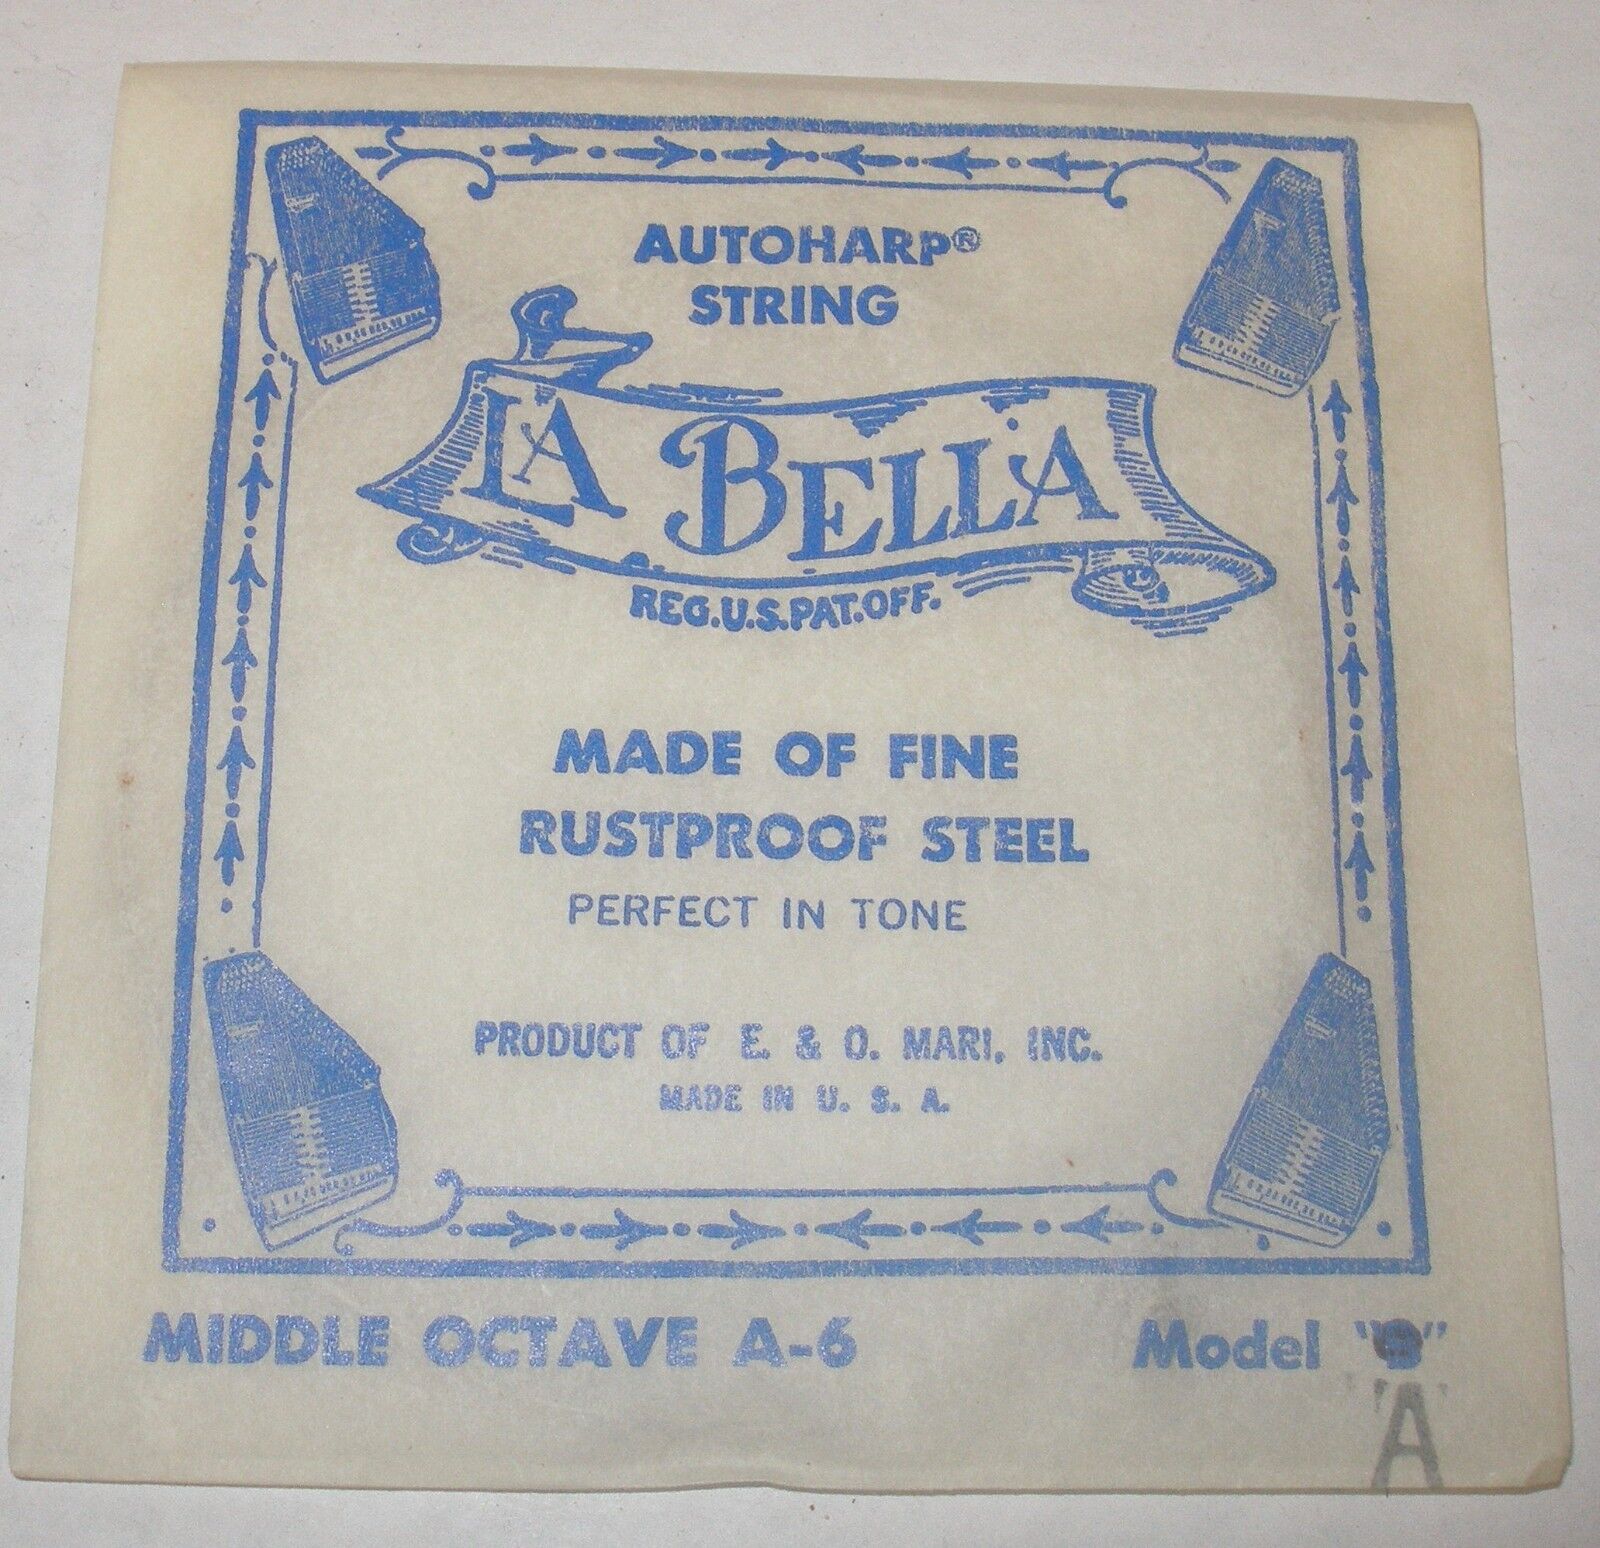 Middle Octave A-6 Labella  Autoharp String Model A  Rustproof Steel